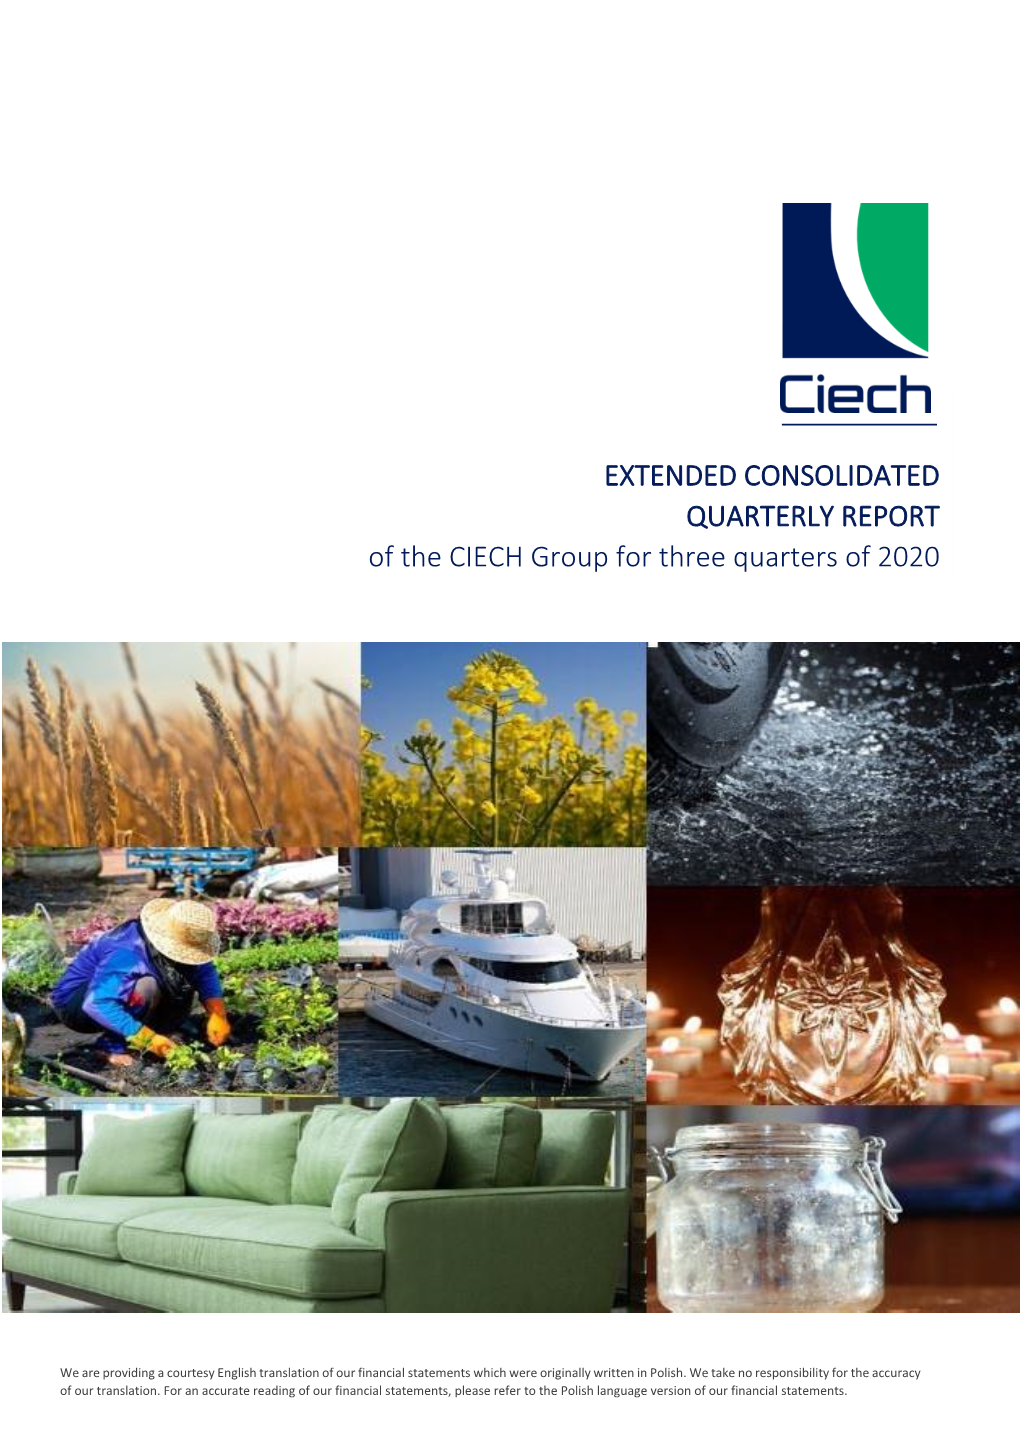 Pdf Extended Consolidated Quaterly Report of the CIECH Group For